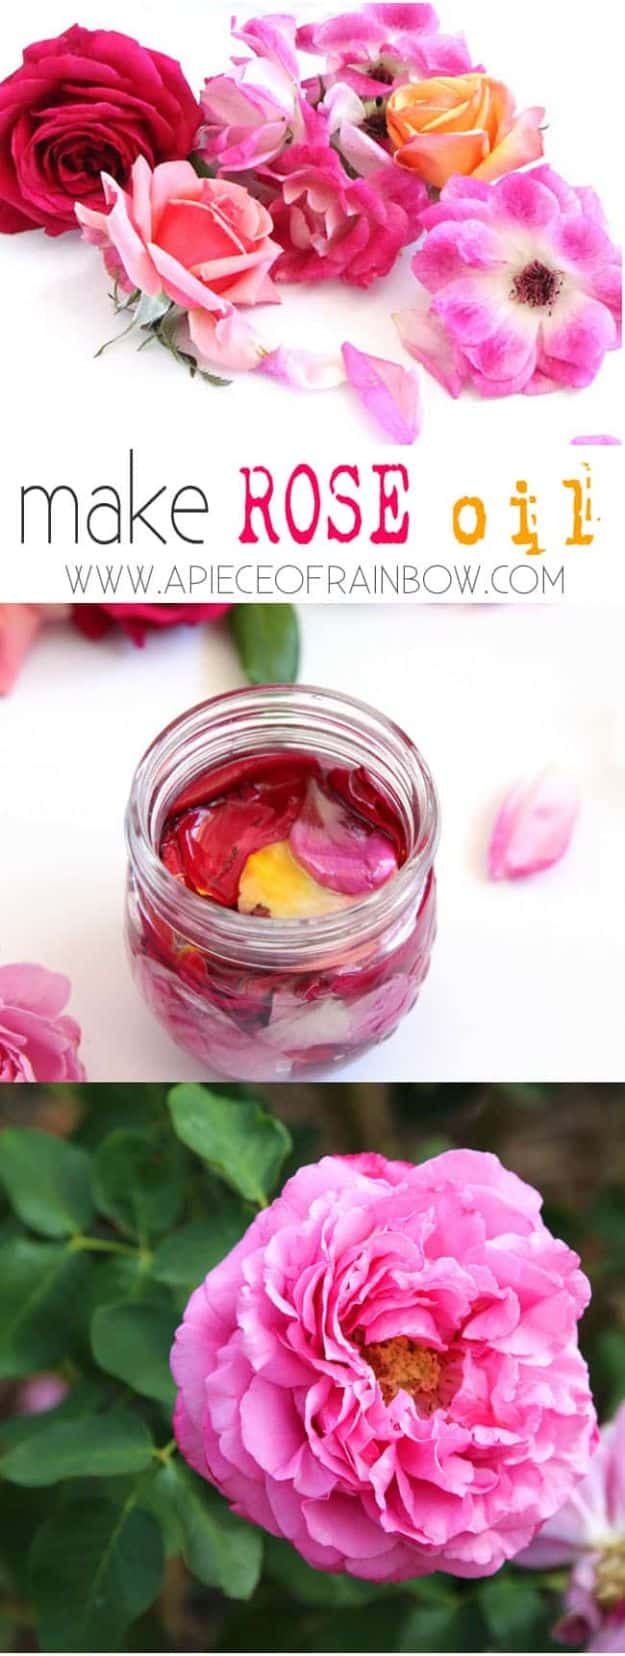 Rose Crafts - DIY Rose Oil - Easy Craft Projects With Roses - Paper Flowers, Quilt Patterns, DIY Rose Art for Kids - Dried and Real Roses for Wall Art and Do It Yourself Home Decor - Mothers Day Gift Ideas - Fake Rose Arrangements That Look Amazing - Cute Centerrpieces and Crafty DIY Gifts With A Rose http://diyjoy.com/rose-crafts